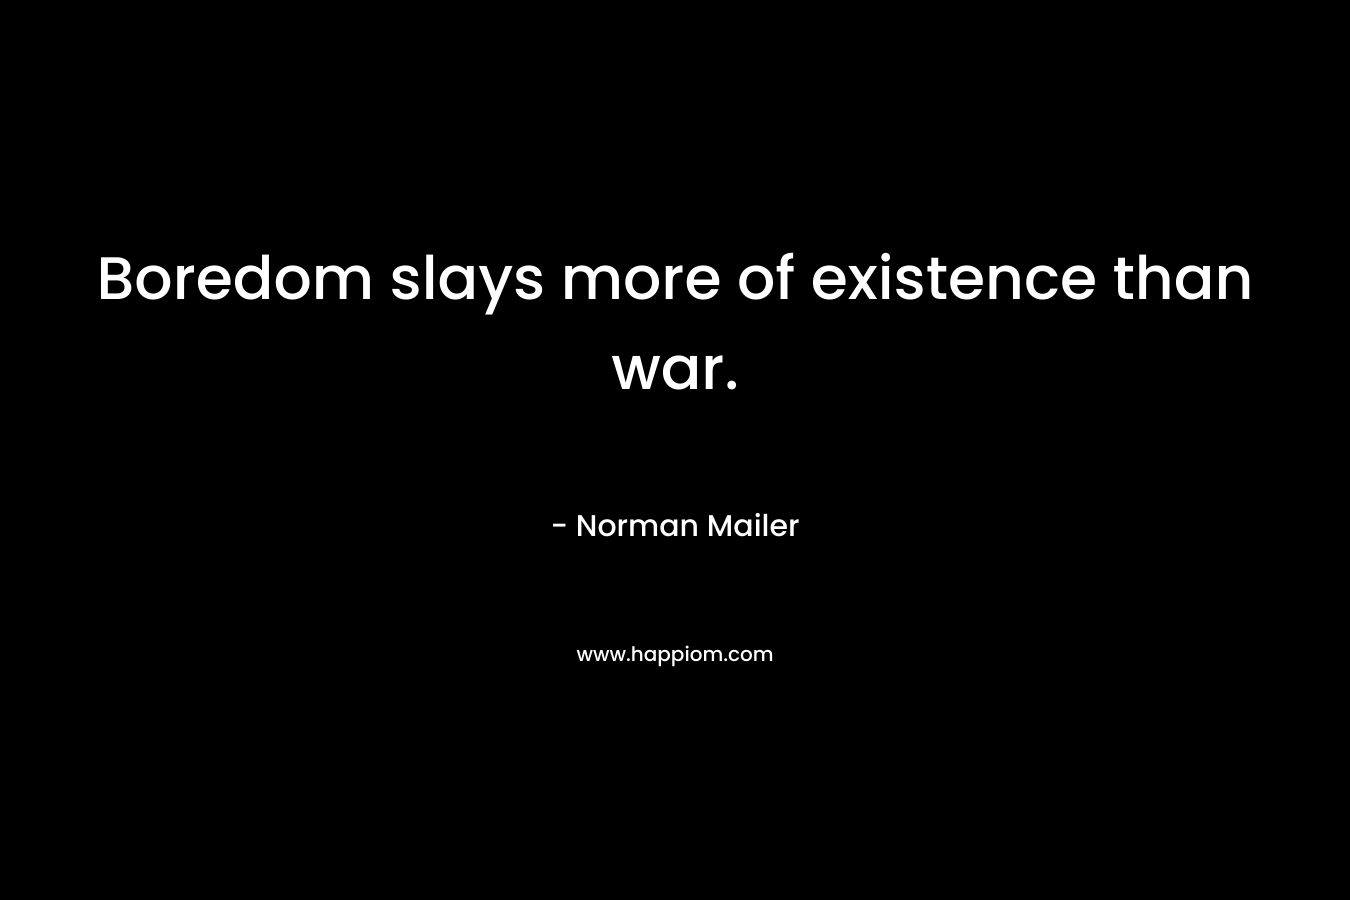 Boredom slays more of existence than war.